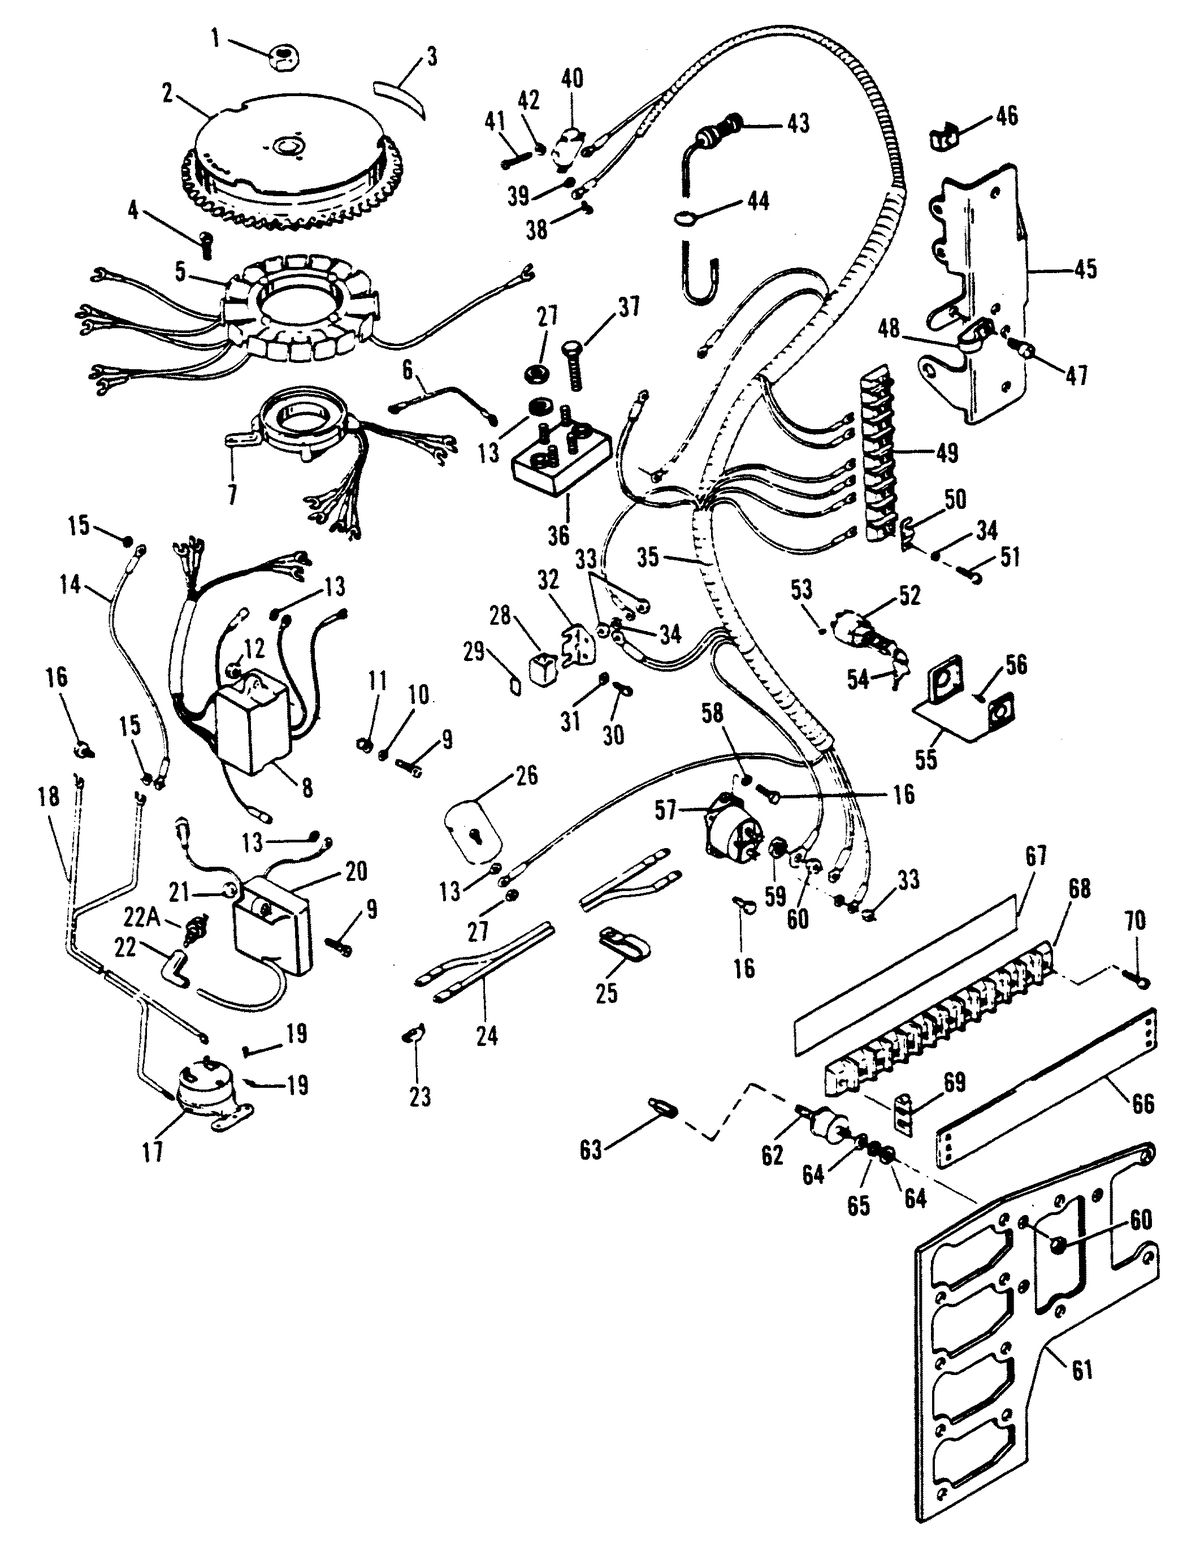 FORCE 120 H.P. IGNITION COMPONENTS (90A,91C)